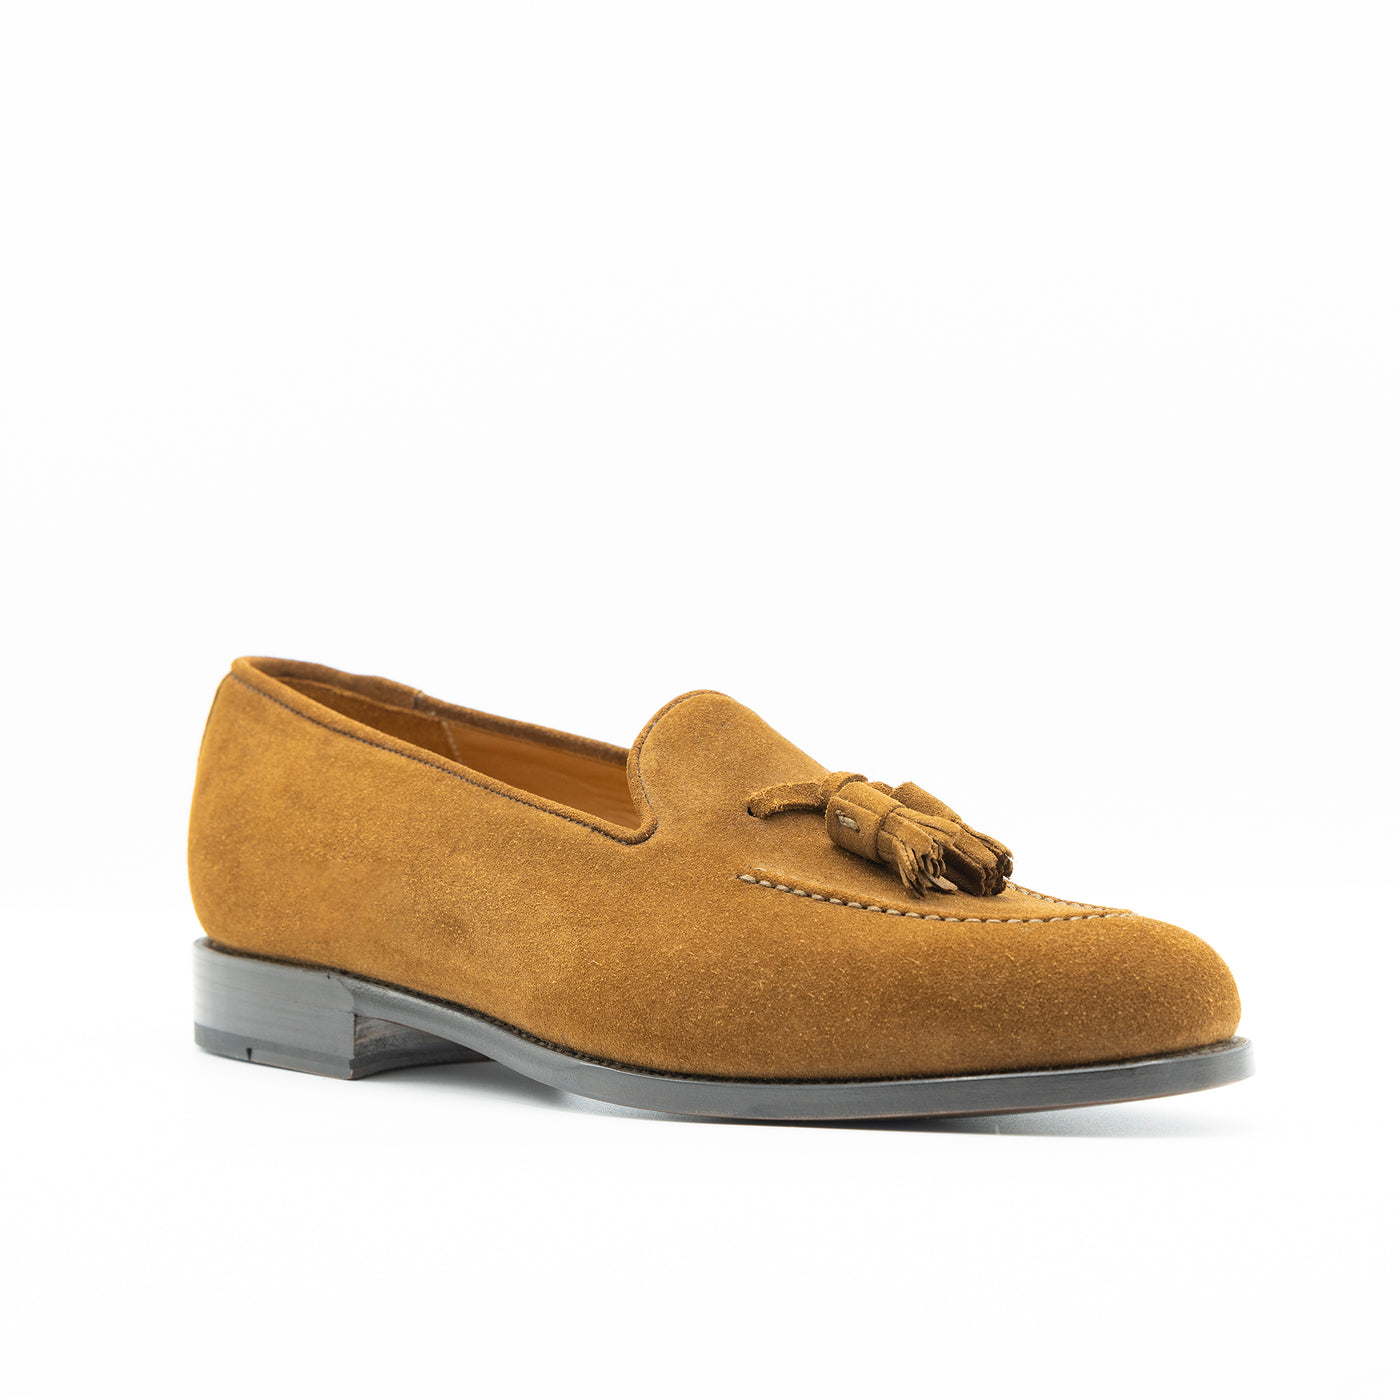 Men's tassel loafer in cognac suede. Set on leather soles with goodyear welted construction. 